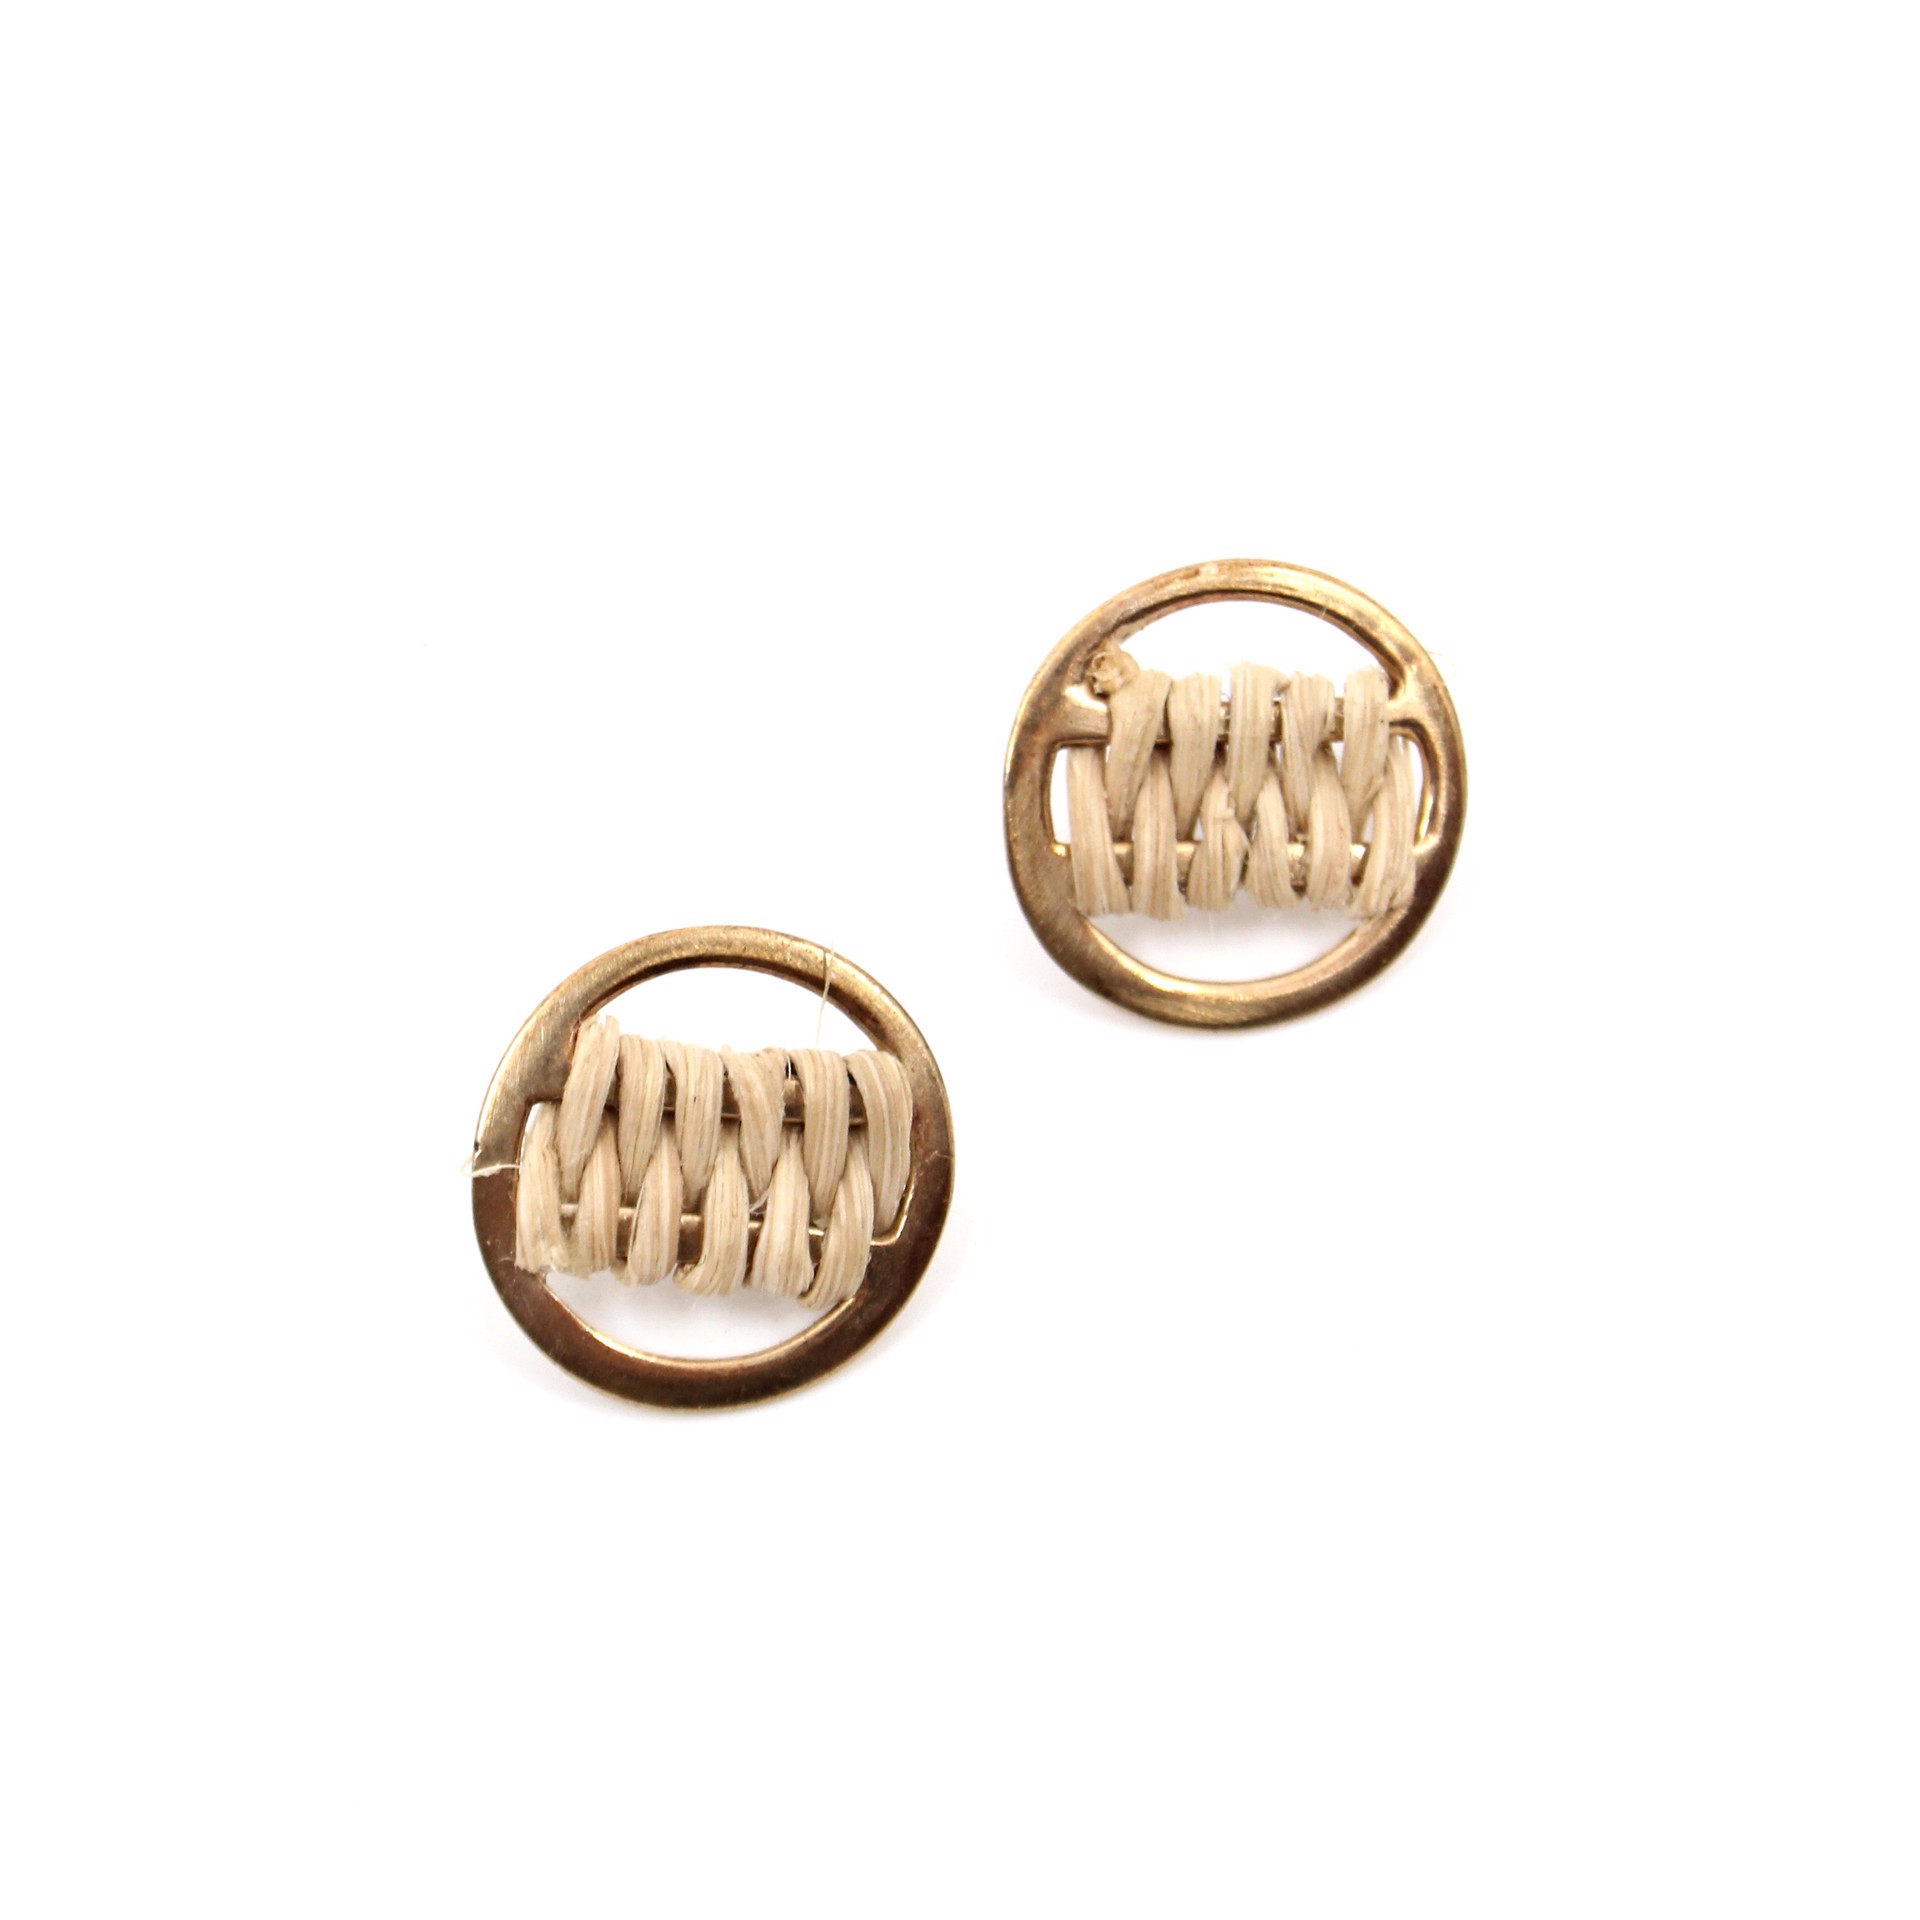 Woven Circle Studs - reed by Flag Mountain Jewelry